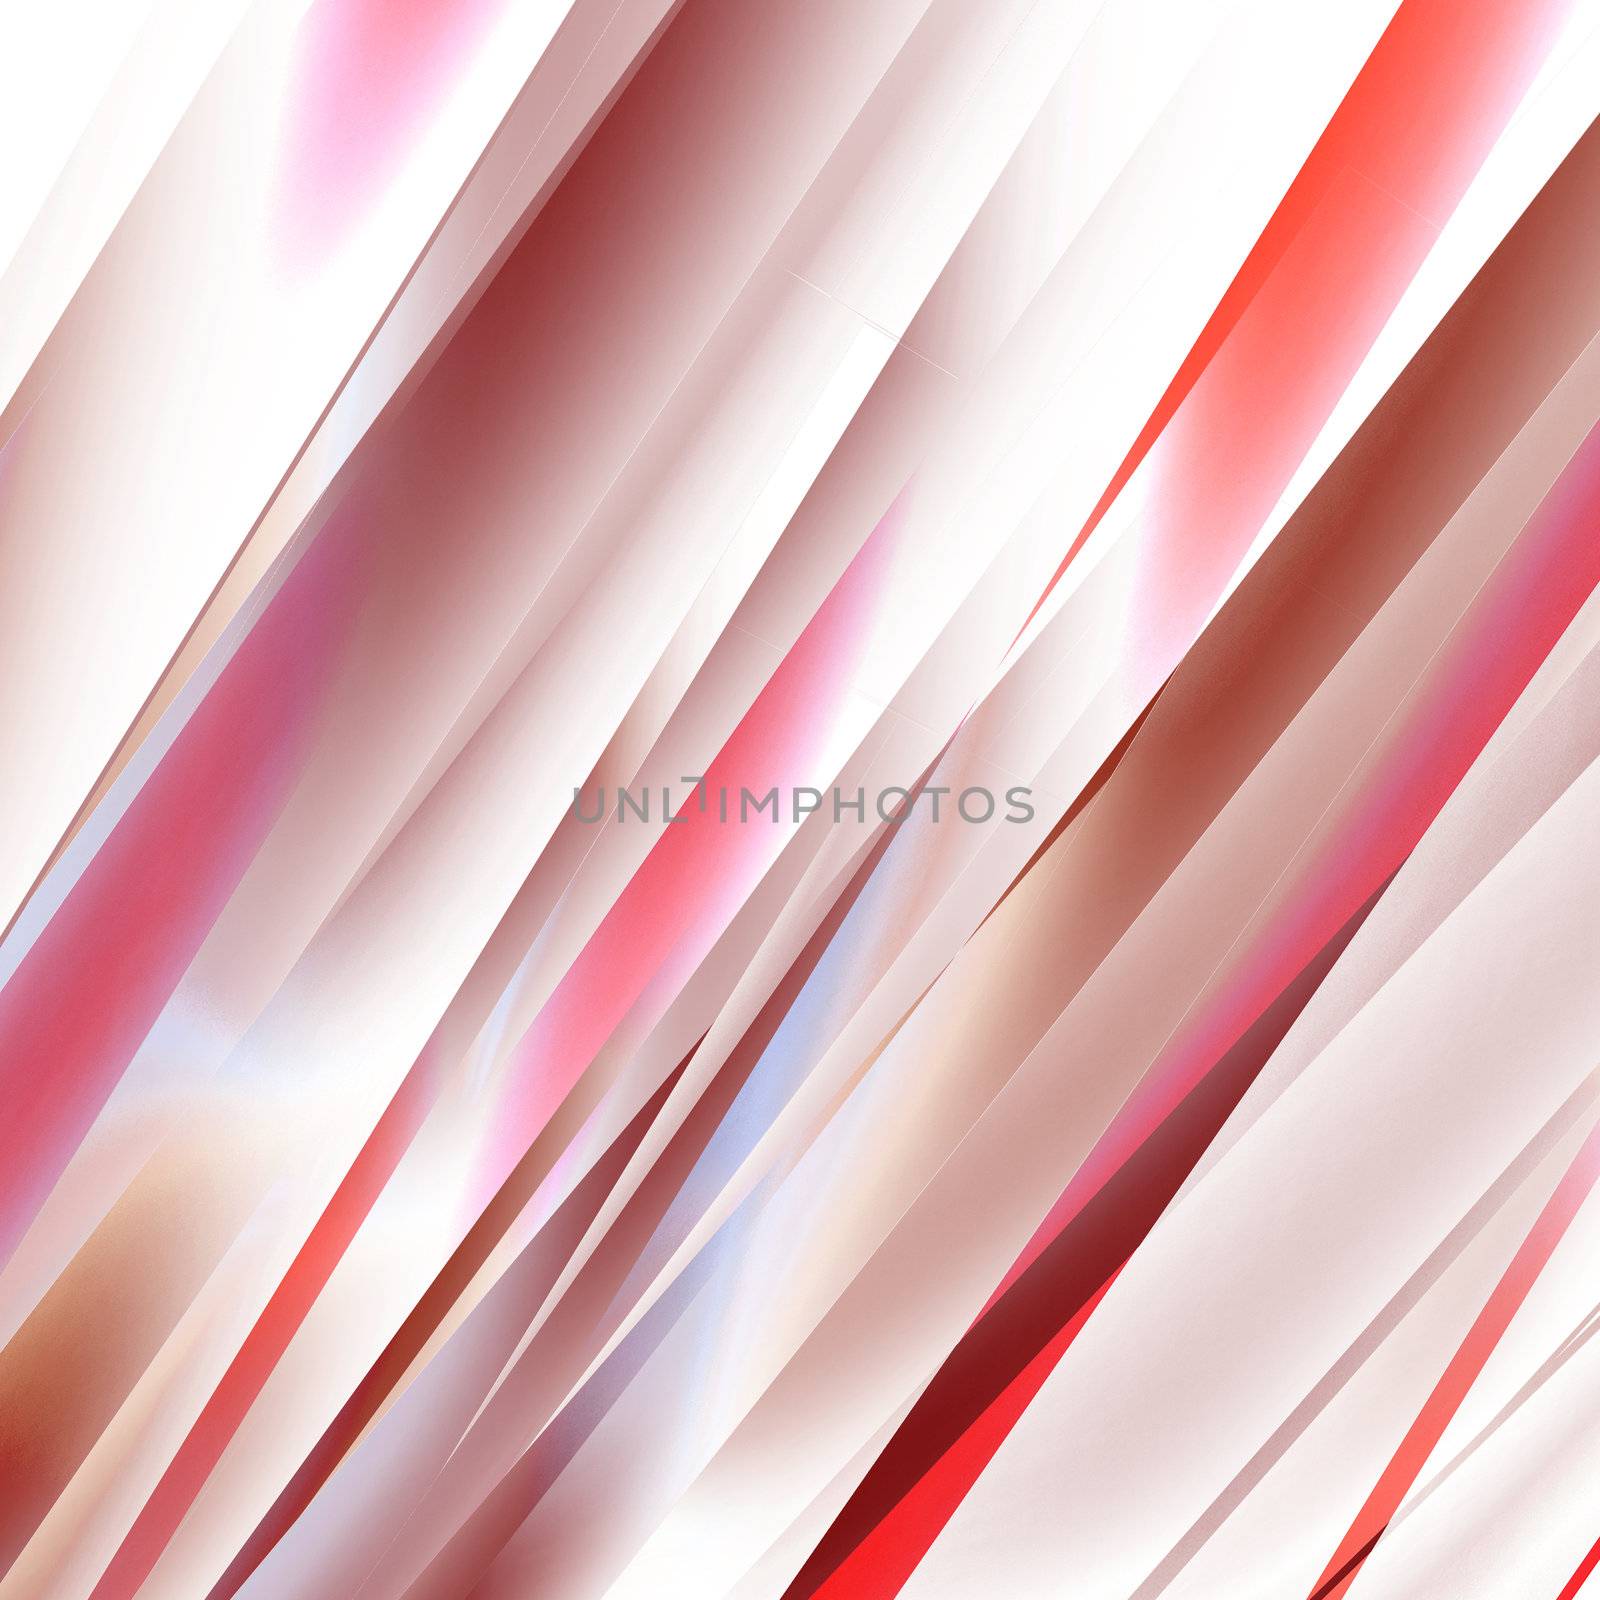 Straight red lines in a downward angle against a white background